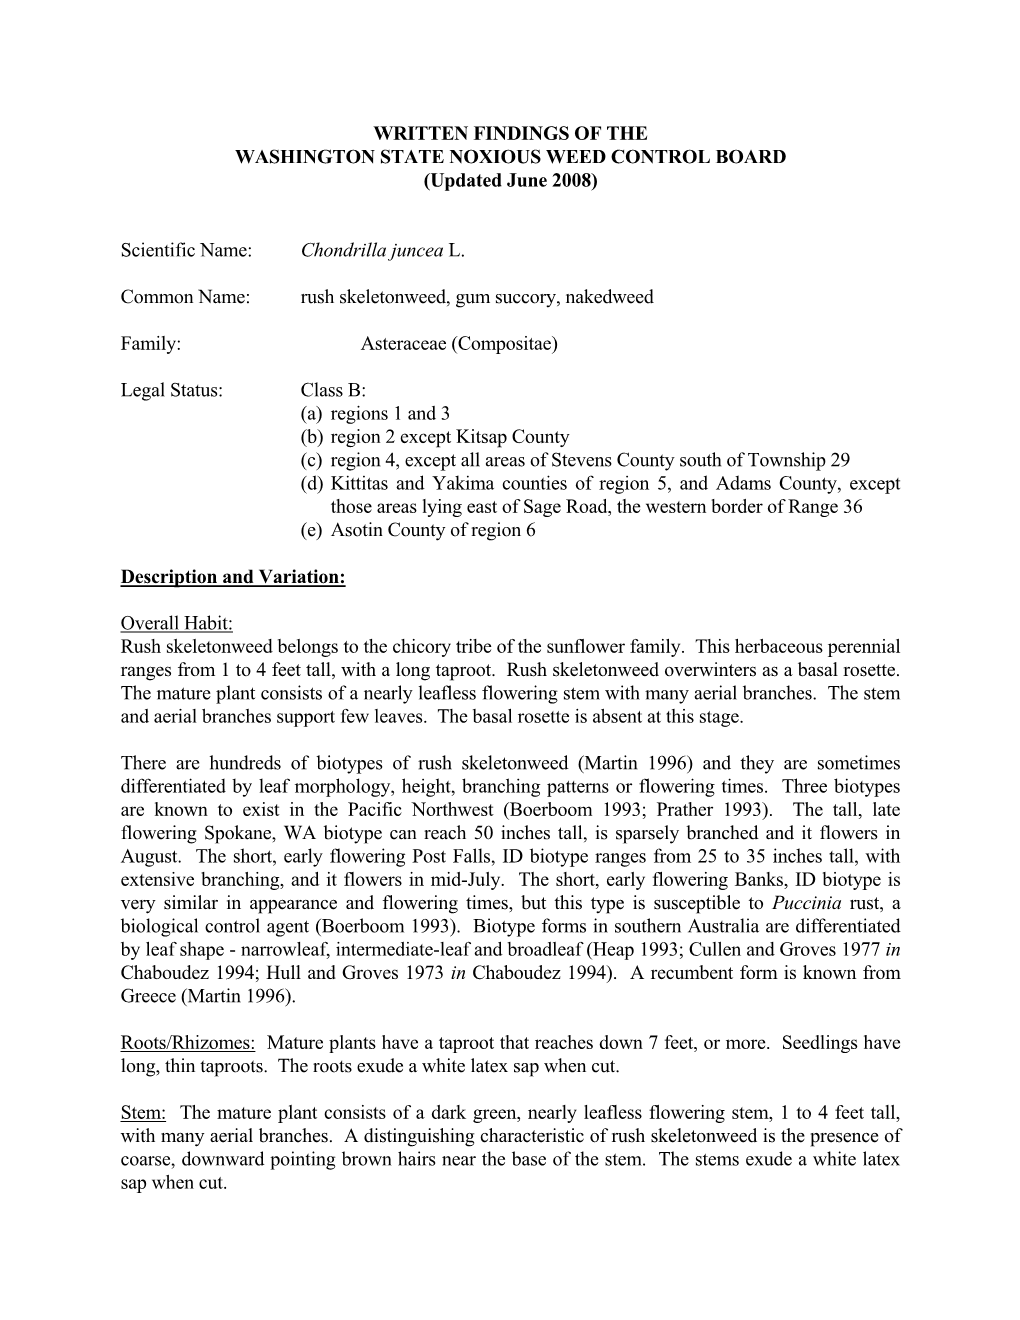 WRITTEN FINDINGS of the WASHINGTON STATE NOXIOUS WEED CONTROL BOARD (Updated June 2008)